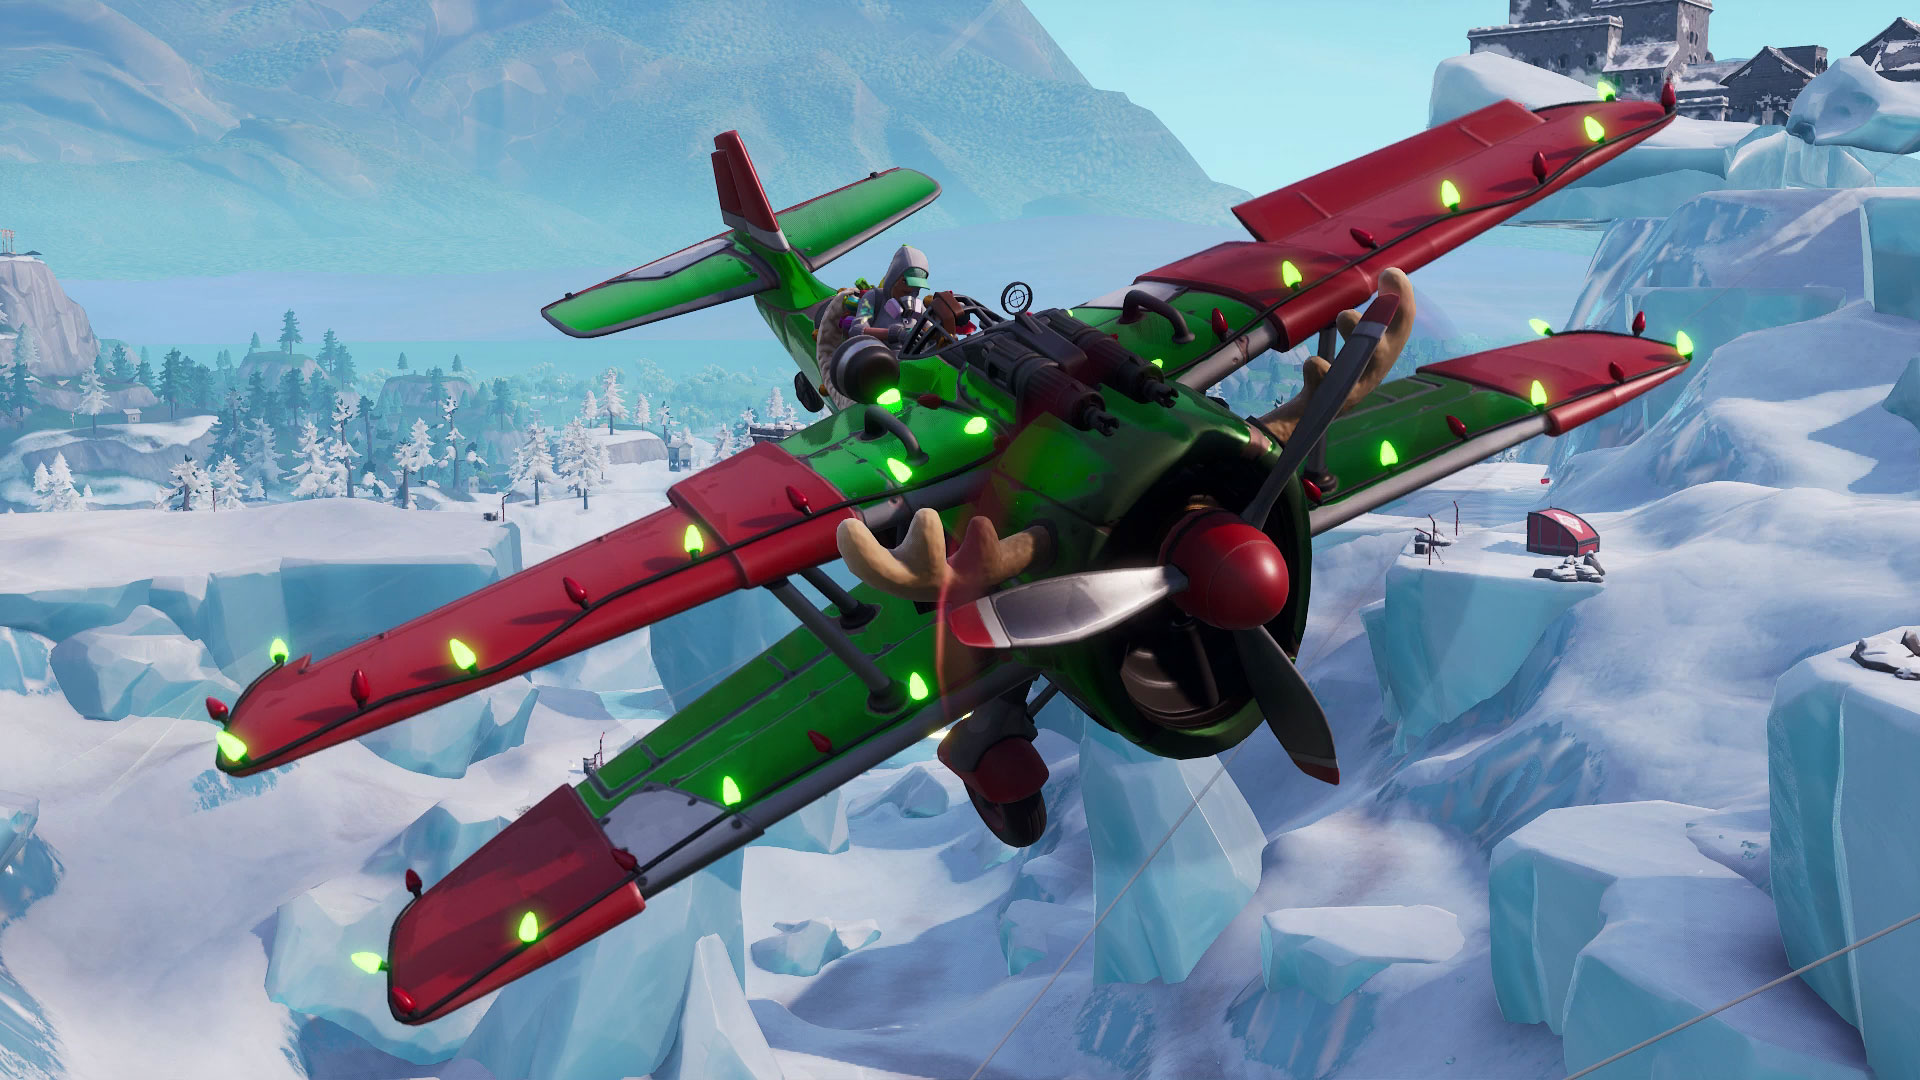 How To Fly The Plane In Fortnite Where To Find A Fortnite Plane And Take To The Skies For Aerial Combat Gamesradar